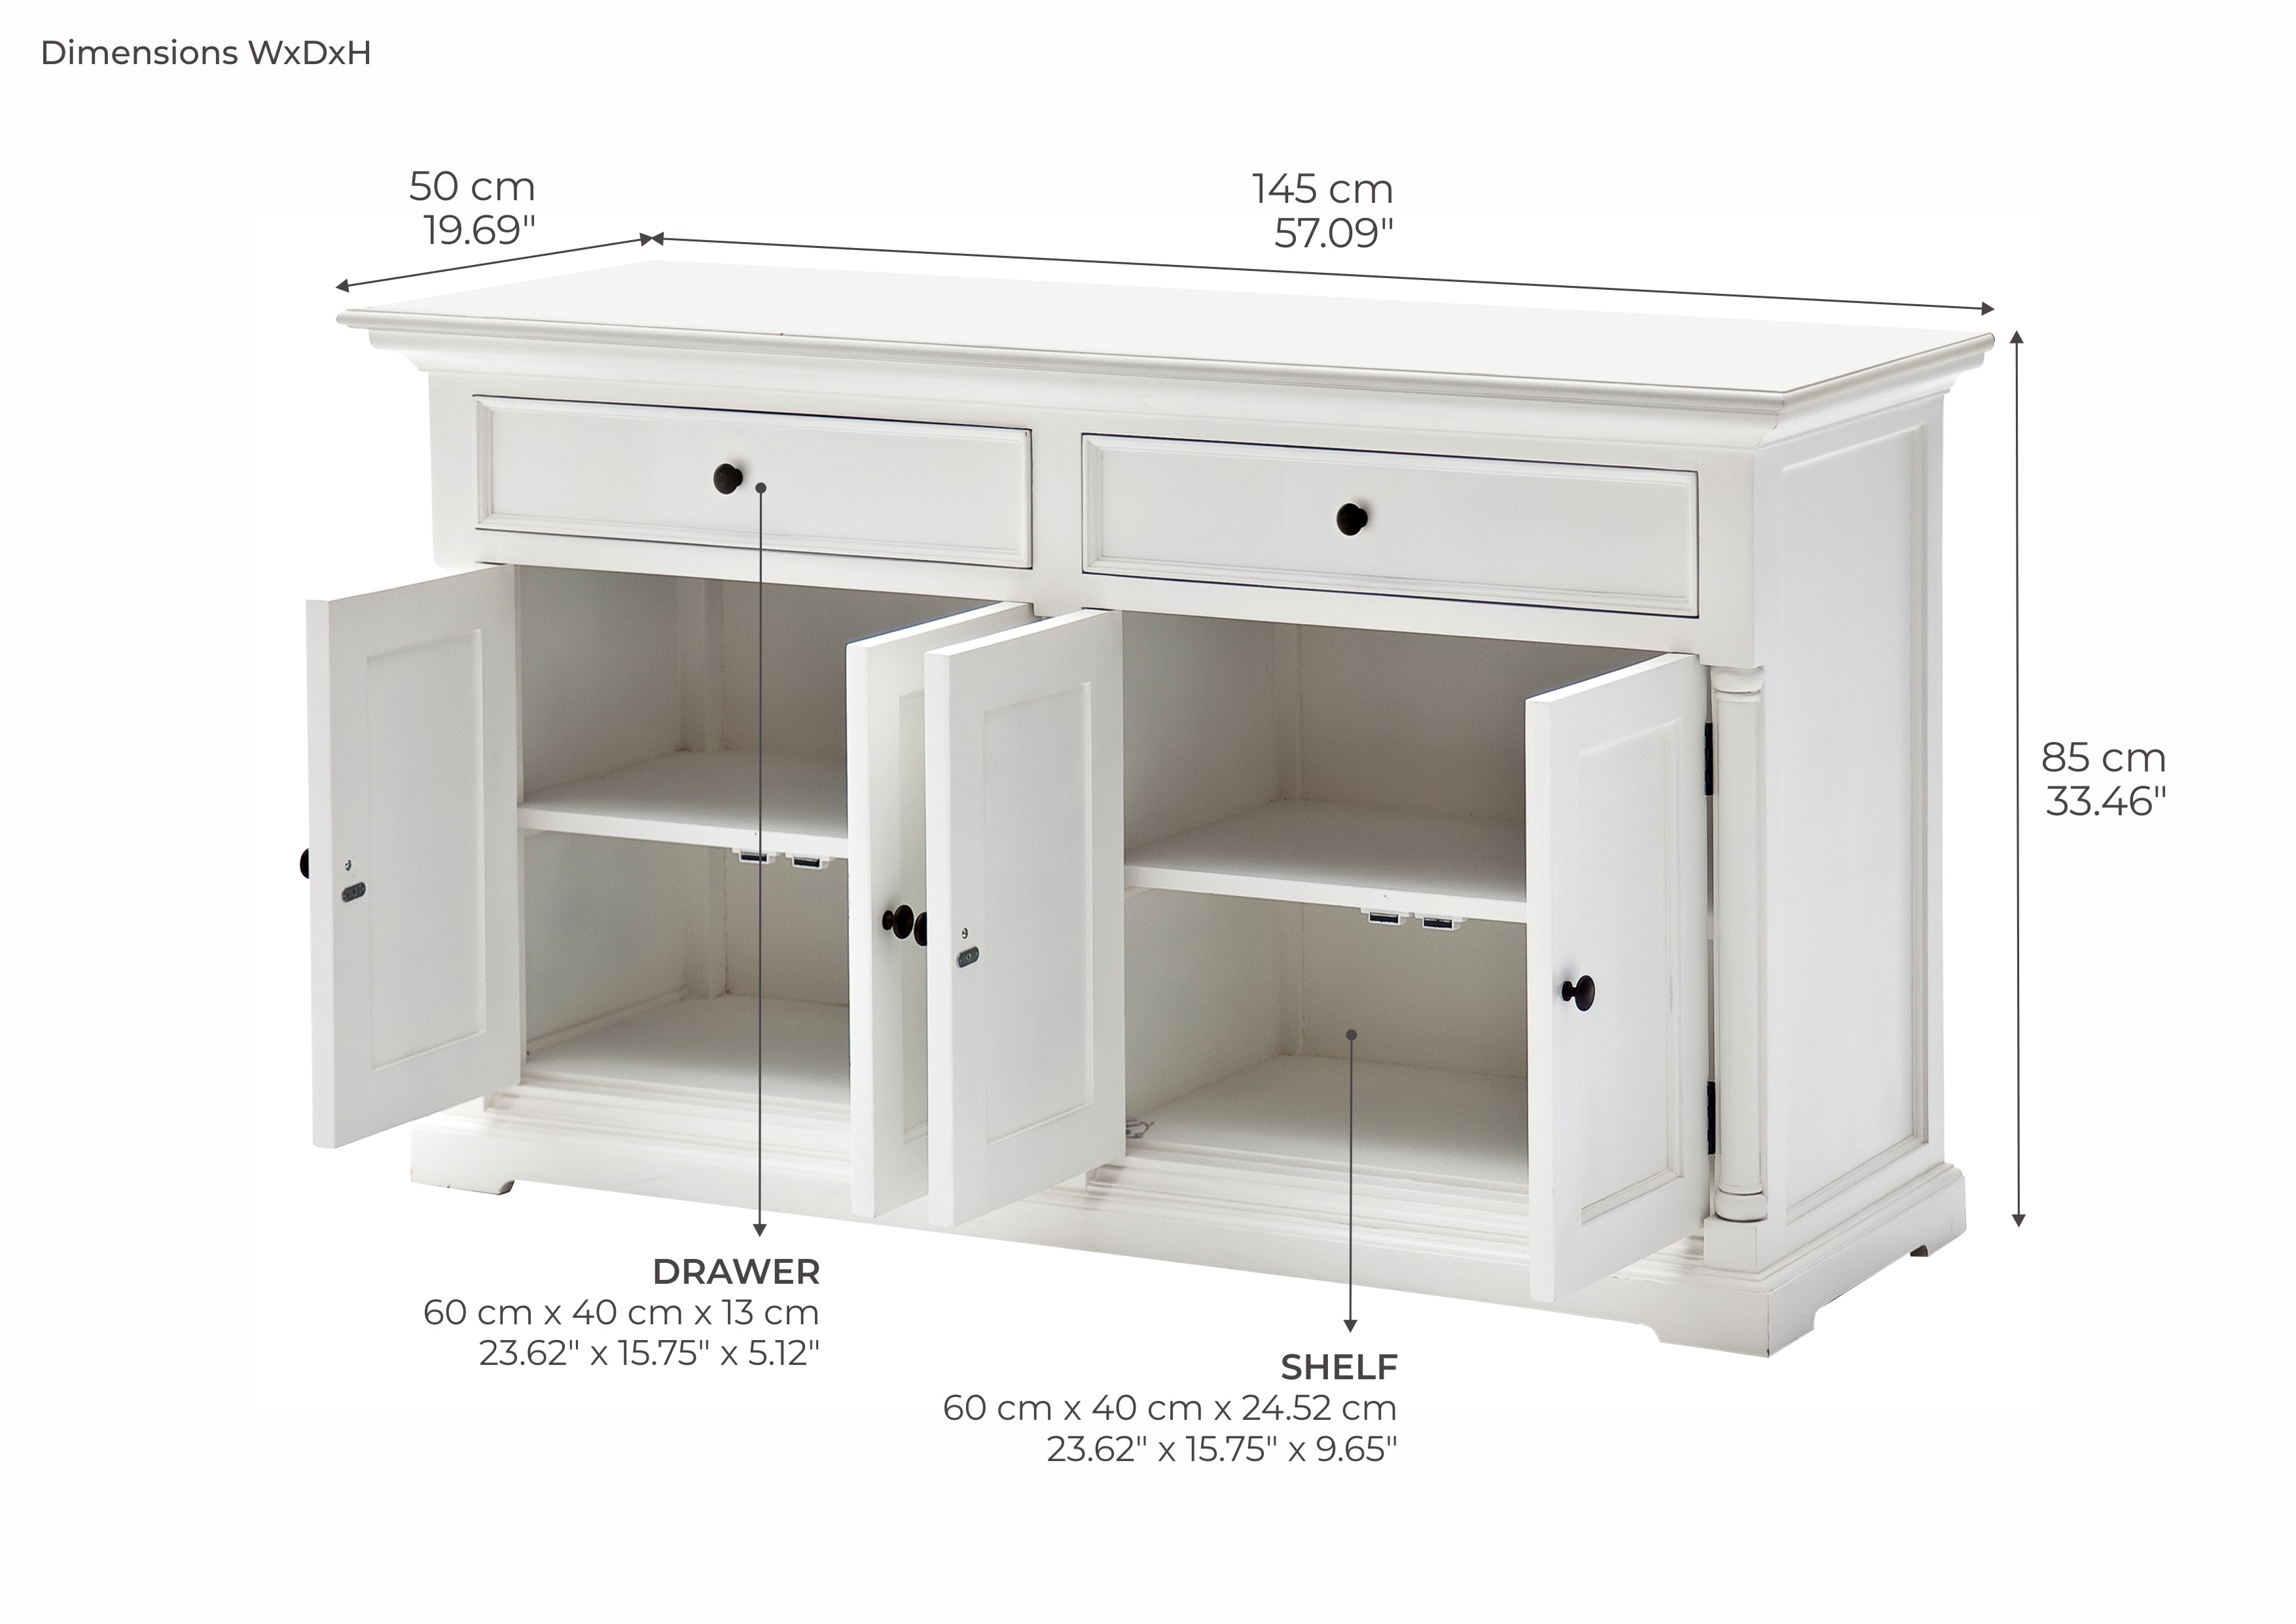 Provence French Country White Classic Buffet